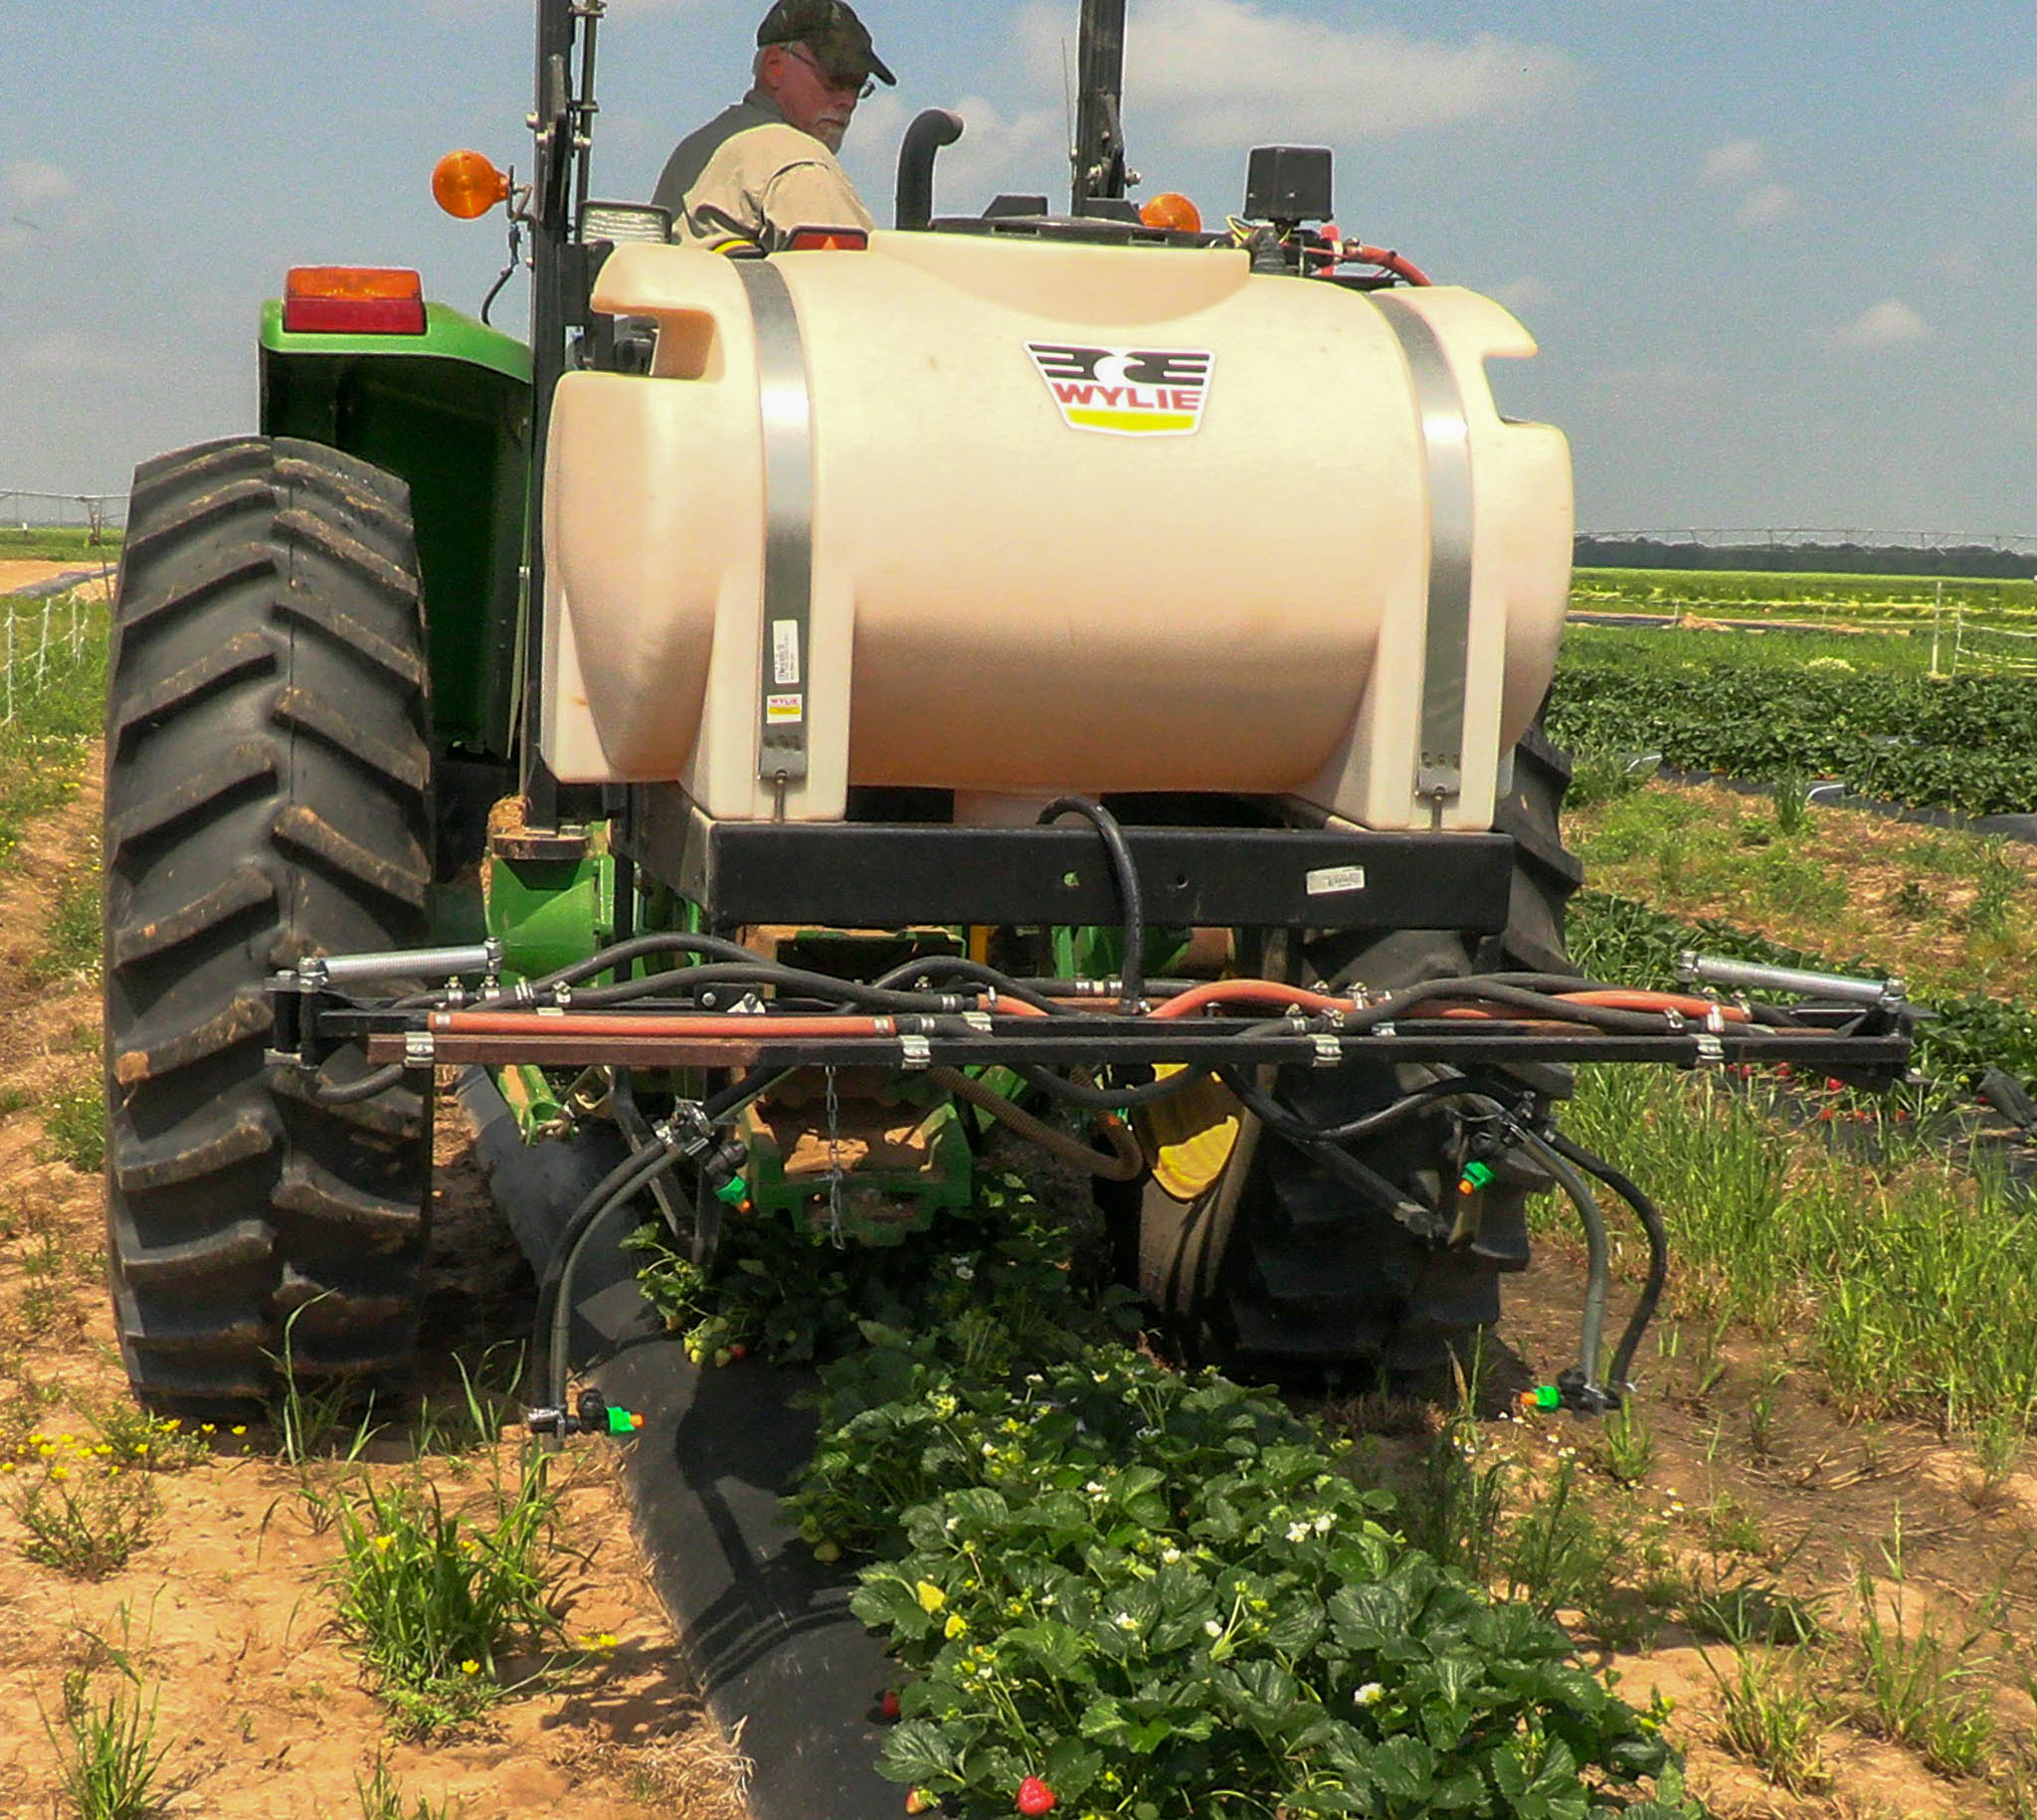 Strawberry sprayer attached to an existing tractor mounted boom sprayer. By changing the hose connections, you retain the ability to use both sprayers. 